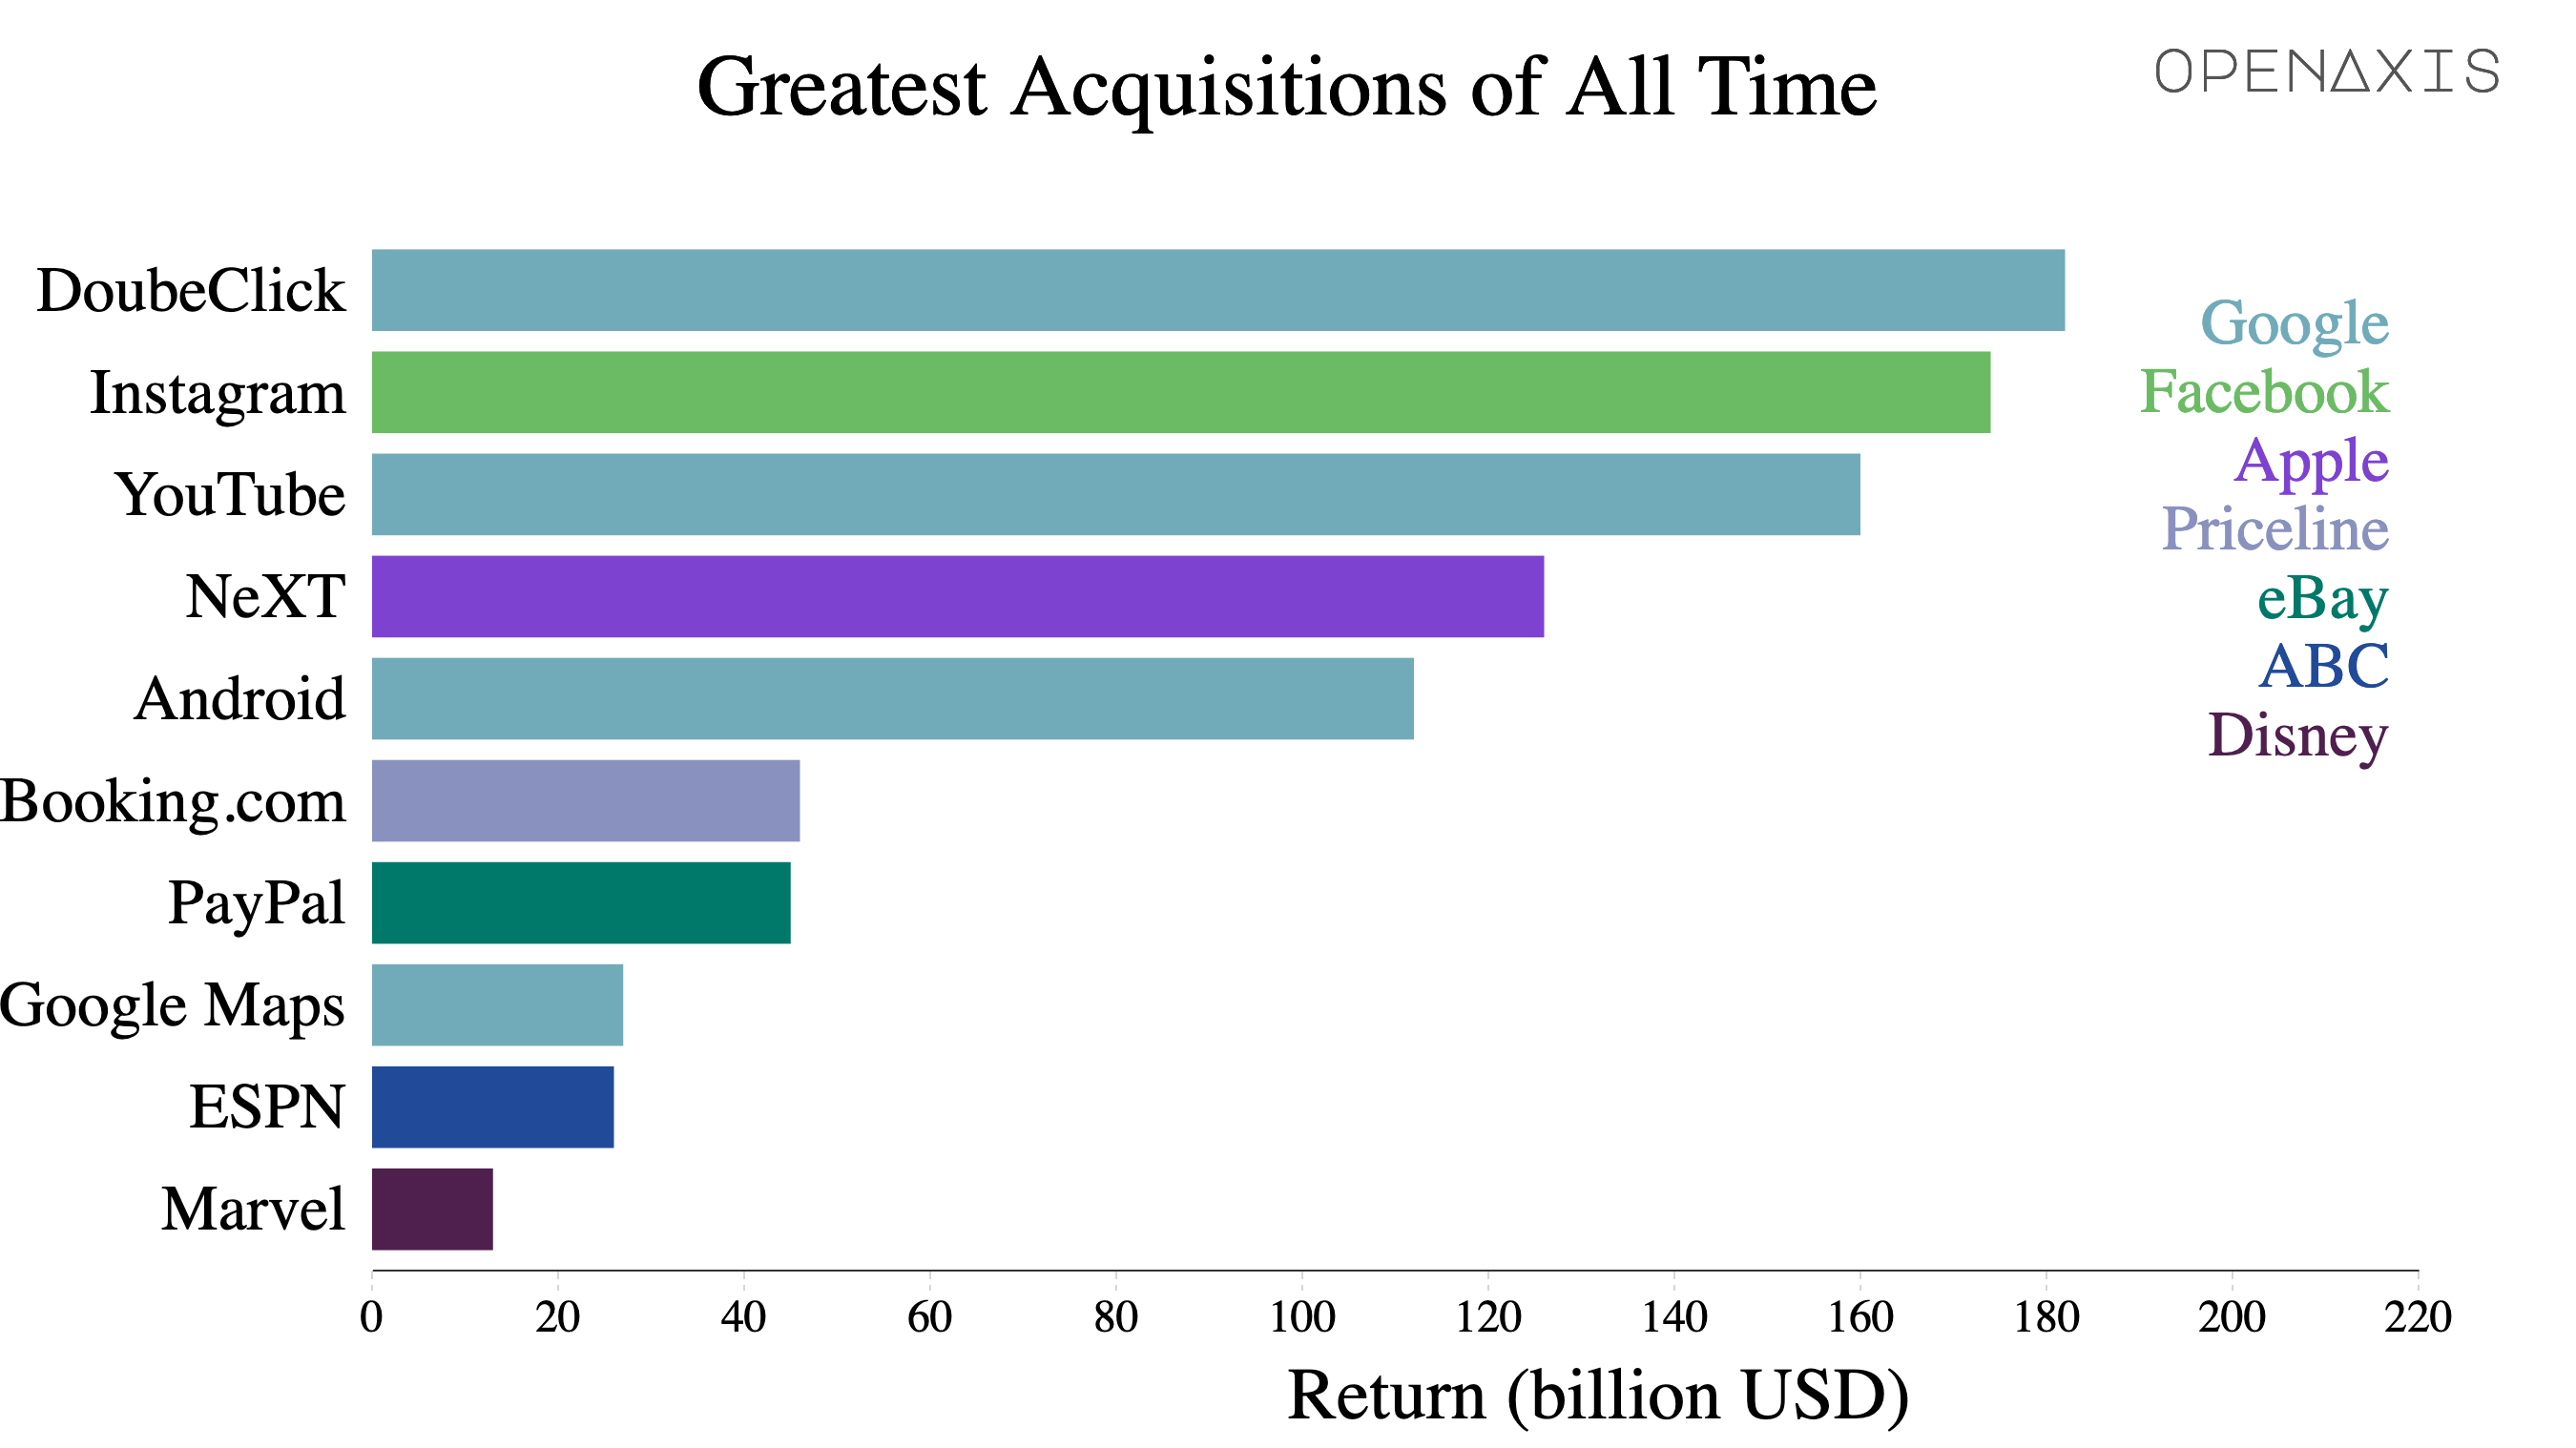 "Greatest Acquisitions of All Time"